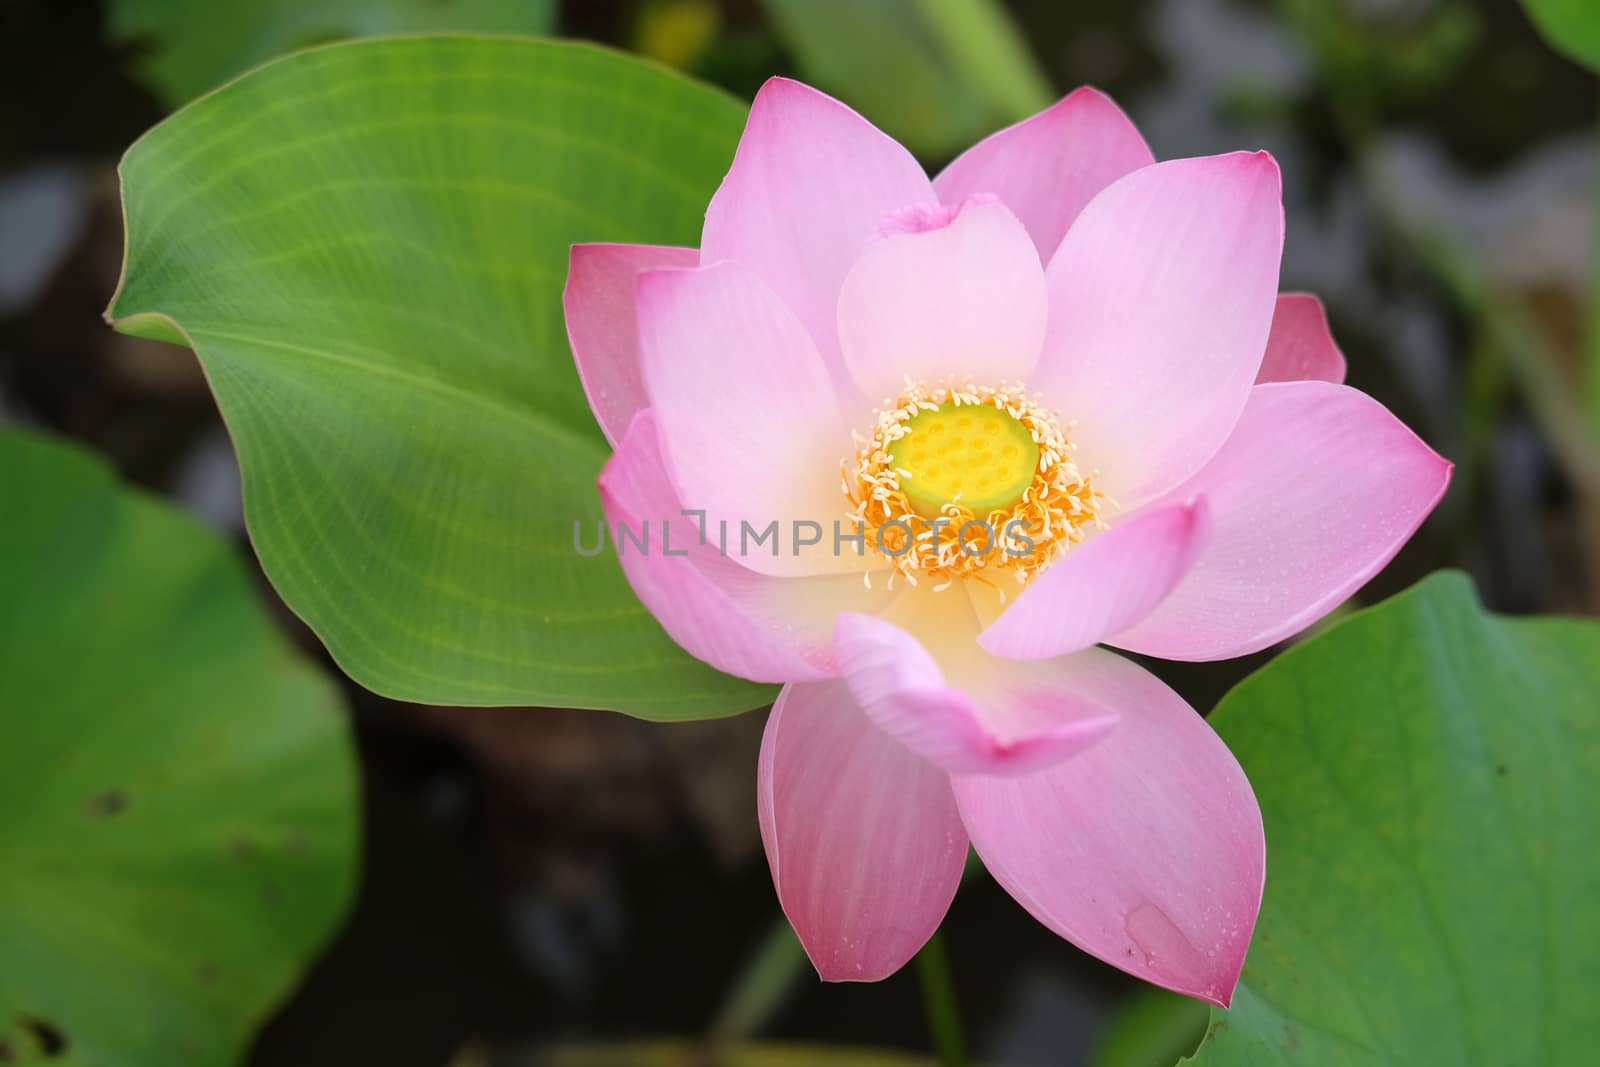 Pink lotus in the pond